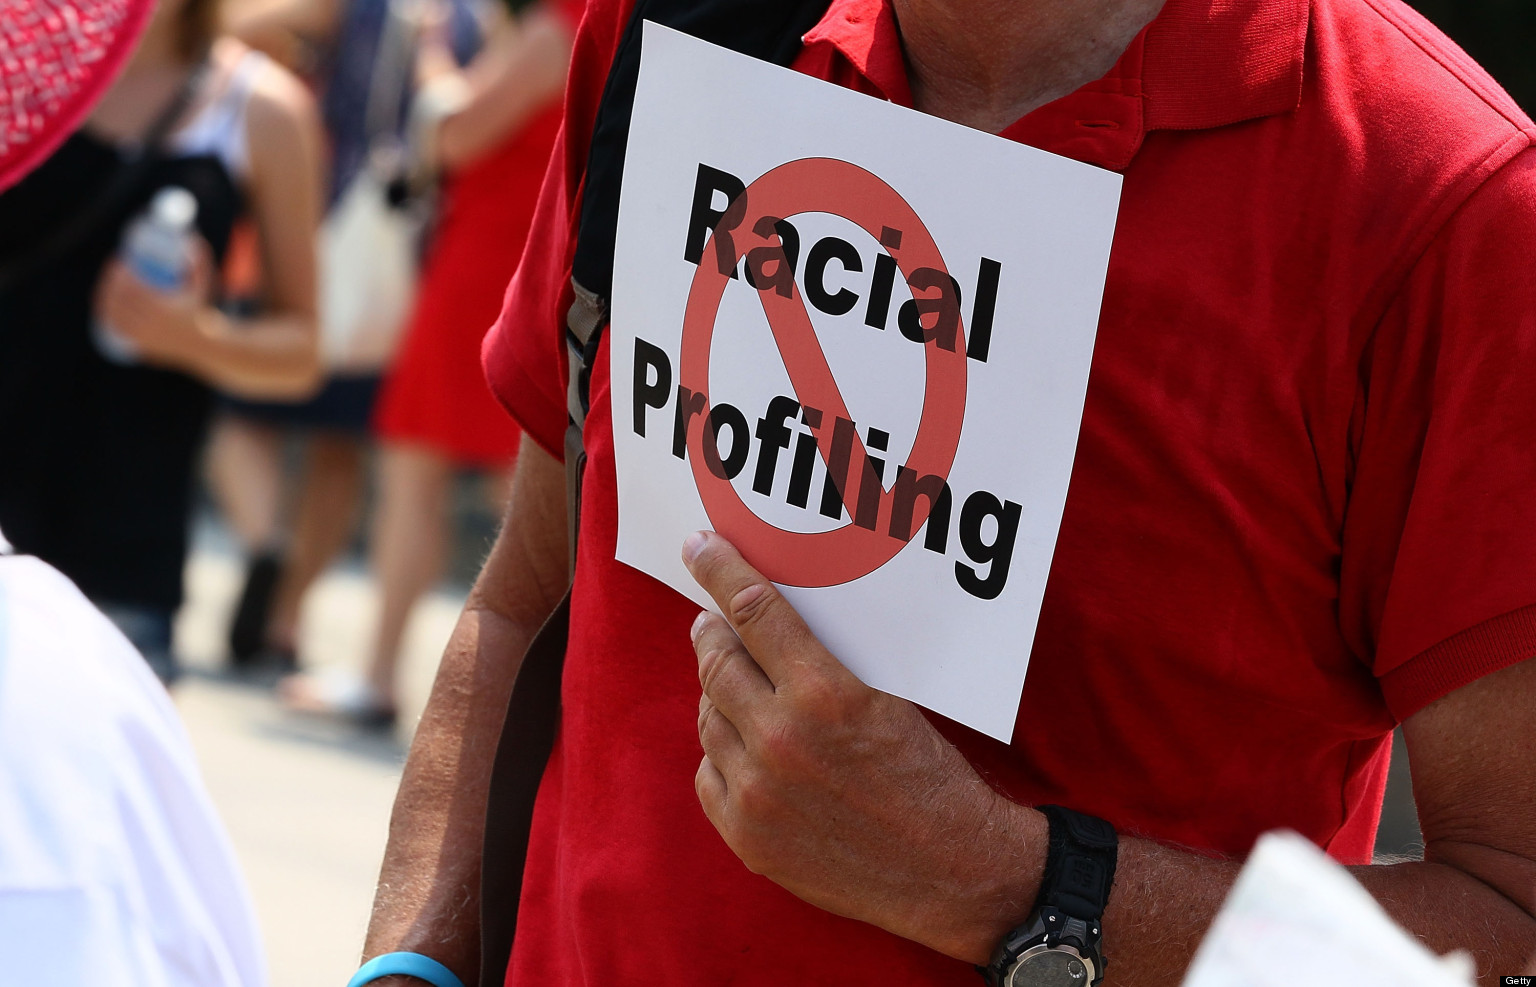 ACLU Racial Profiling App Allows Users To Report Abuse